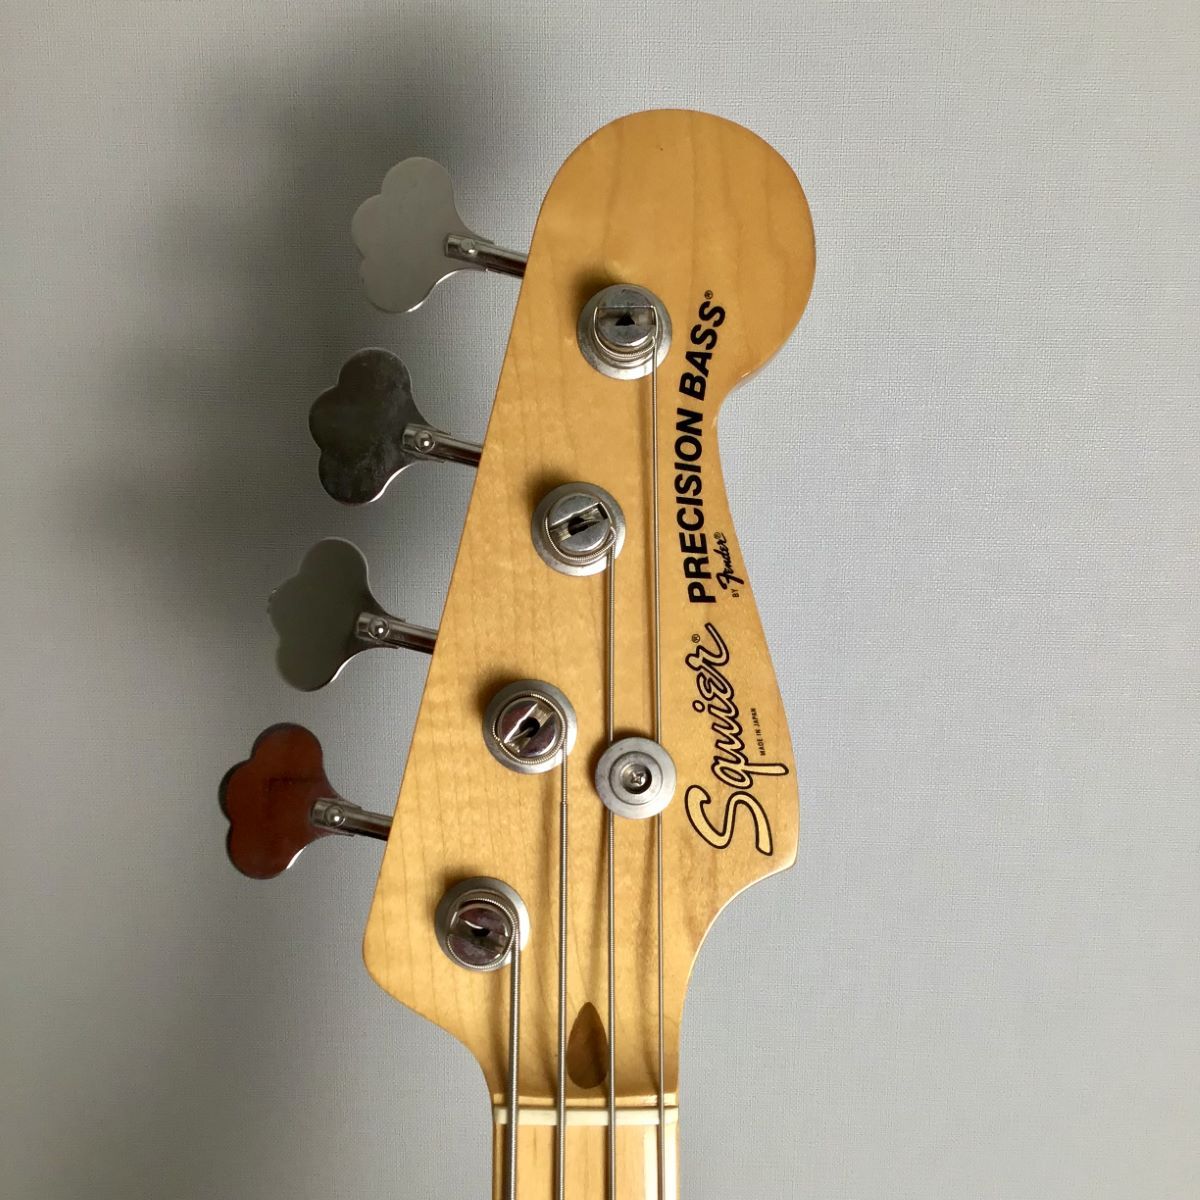 Squier by Fender Squier by Fender Precision Bass 1982 made in 